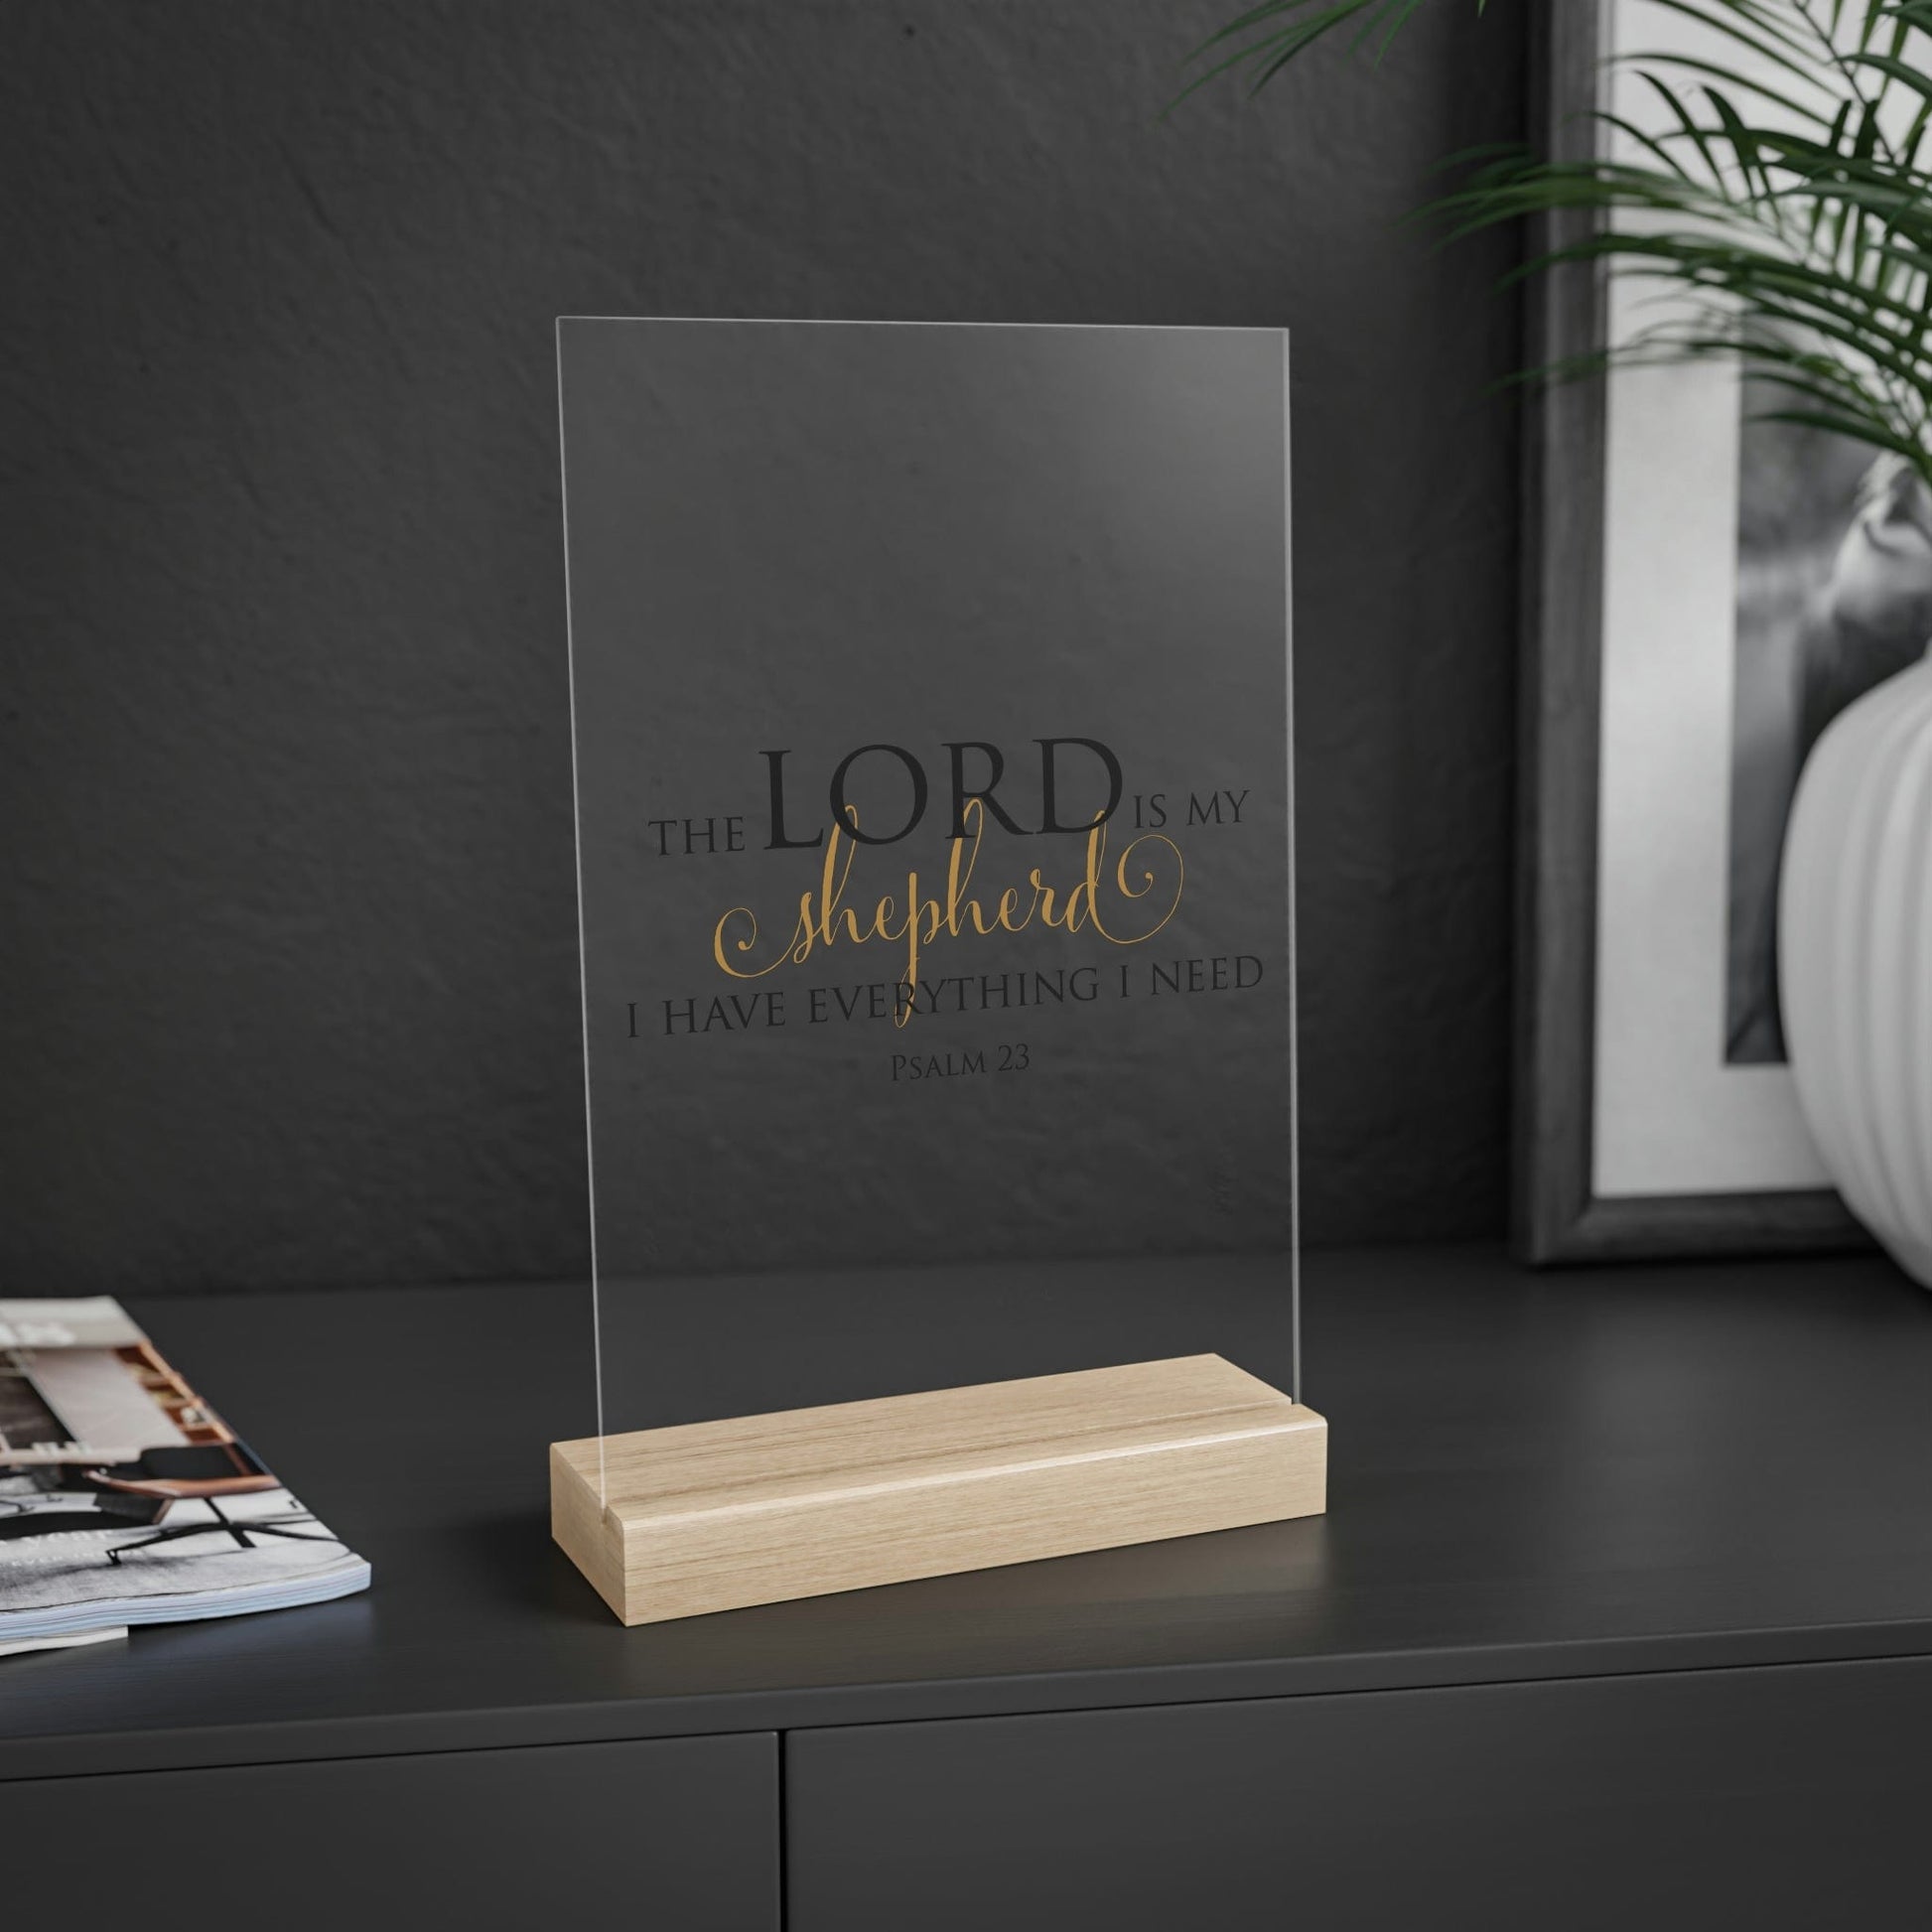 The Lord is My Shepherd Acrylic Sign with Wooden Stand Home Decor Pioneer Kitty Market   